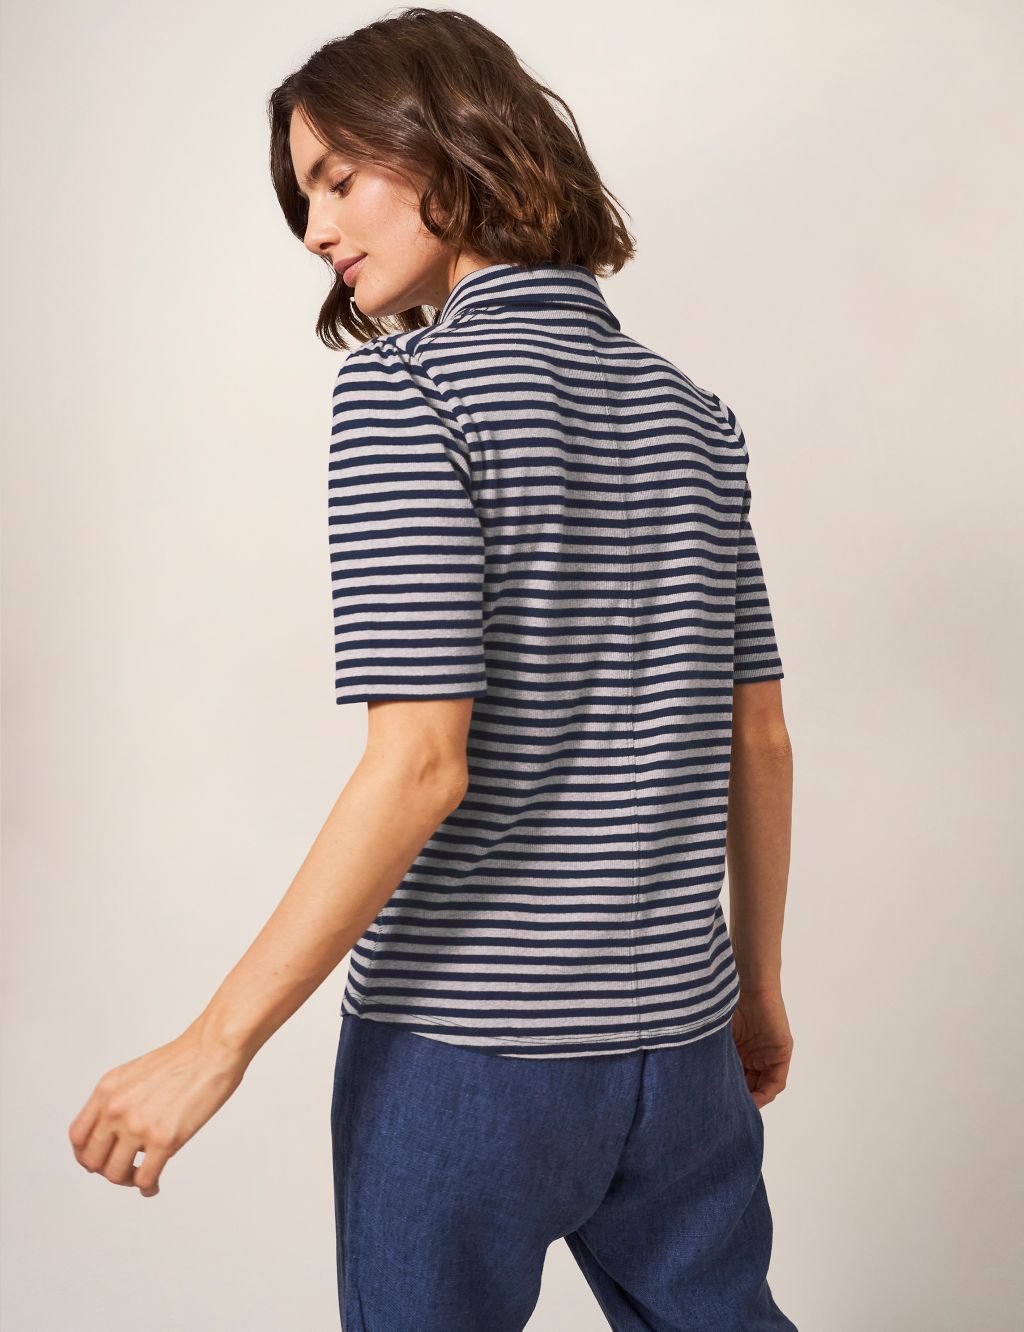 Cotton Rich Striped Collared Shirt image 3